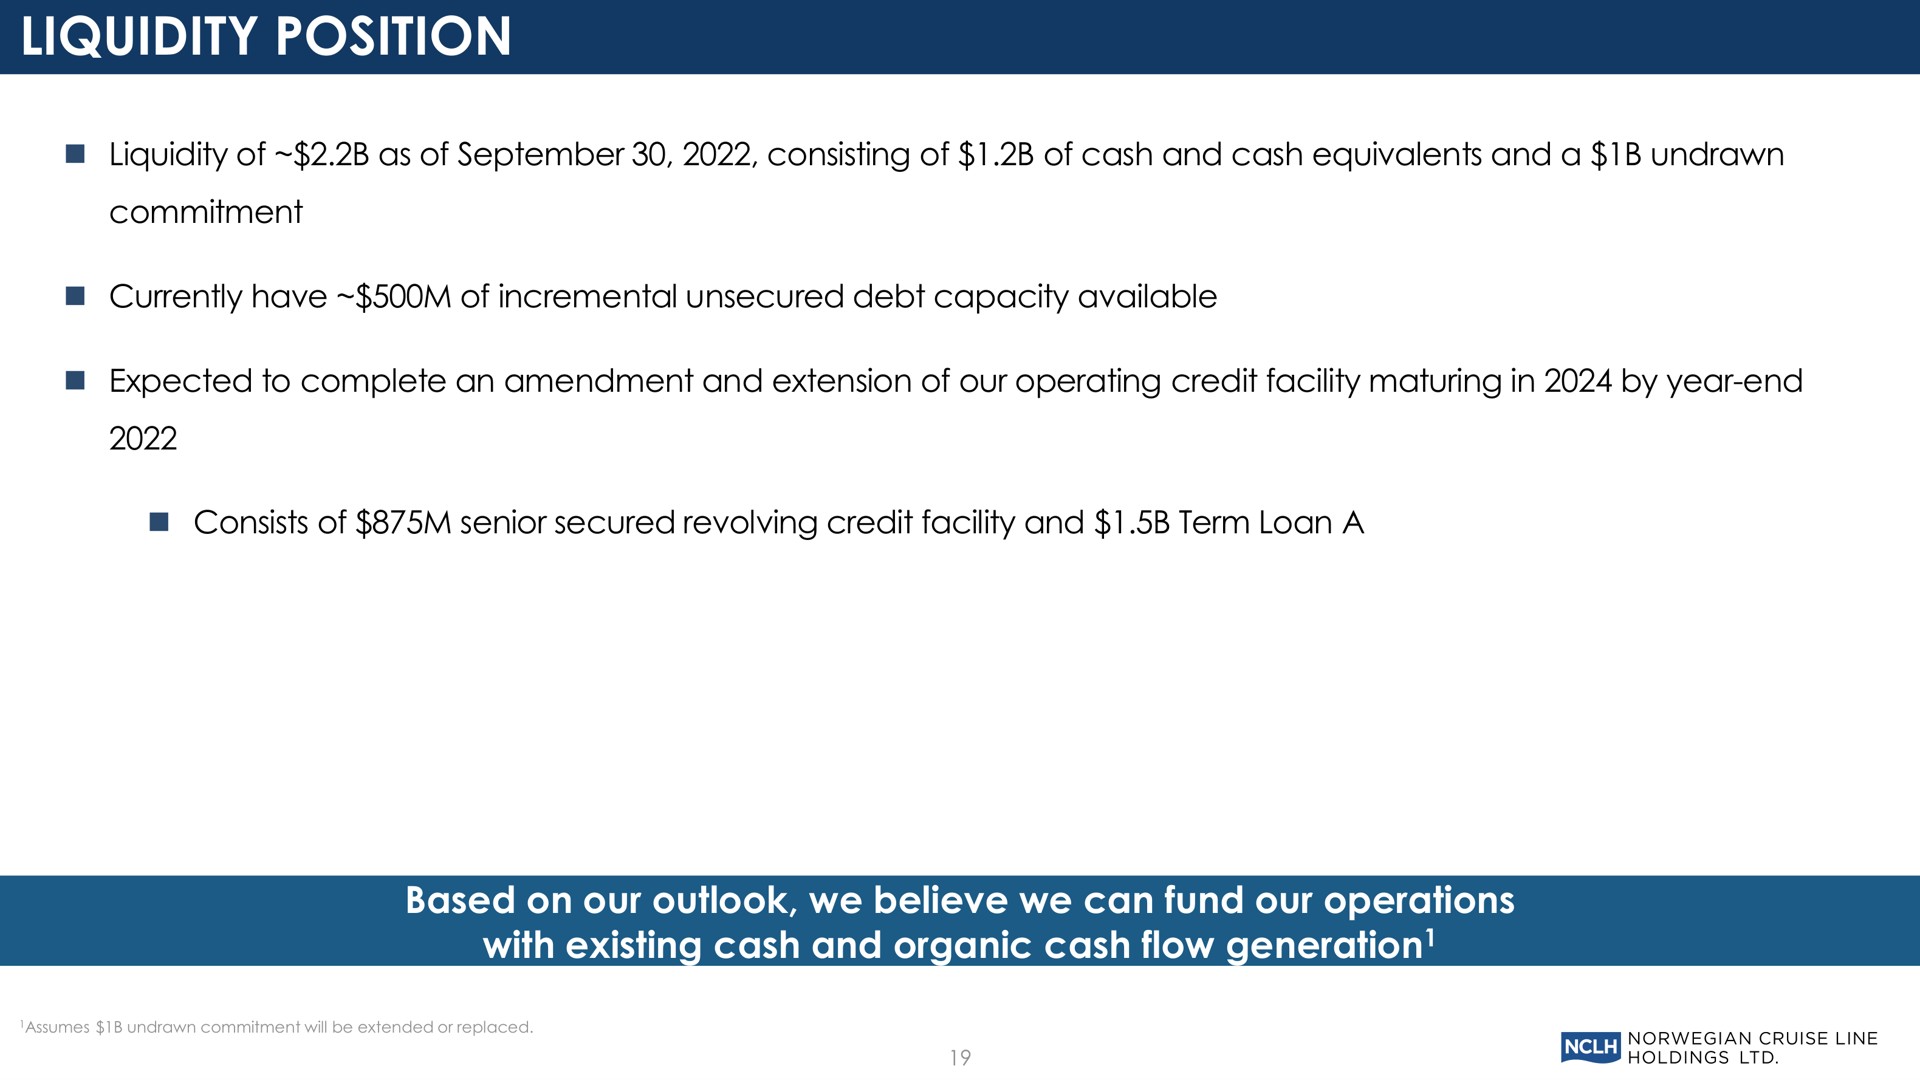 liquidity position based on our outlook we believe we can fund our operations with existing cash and organic cash flow generation | Norwegian Cruise Line